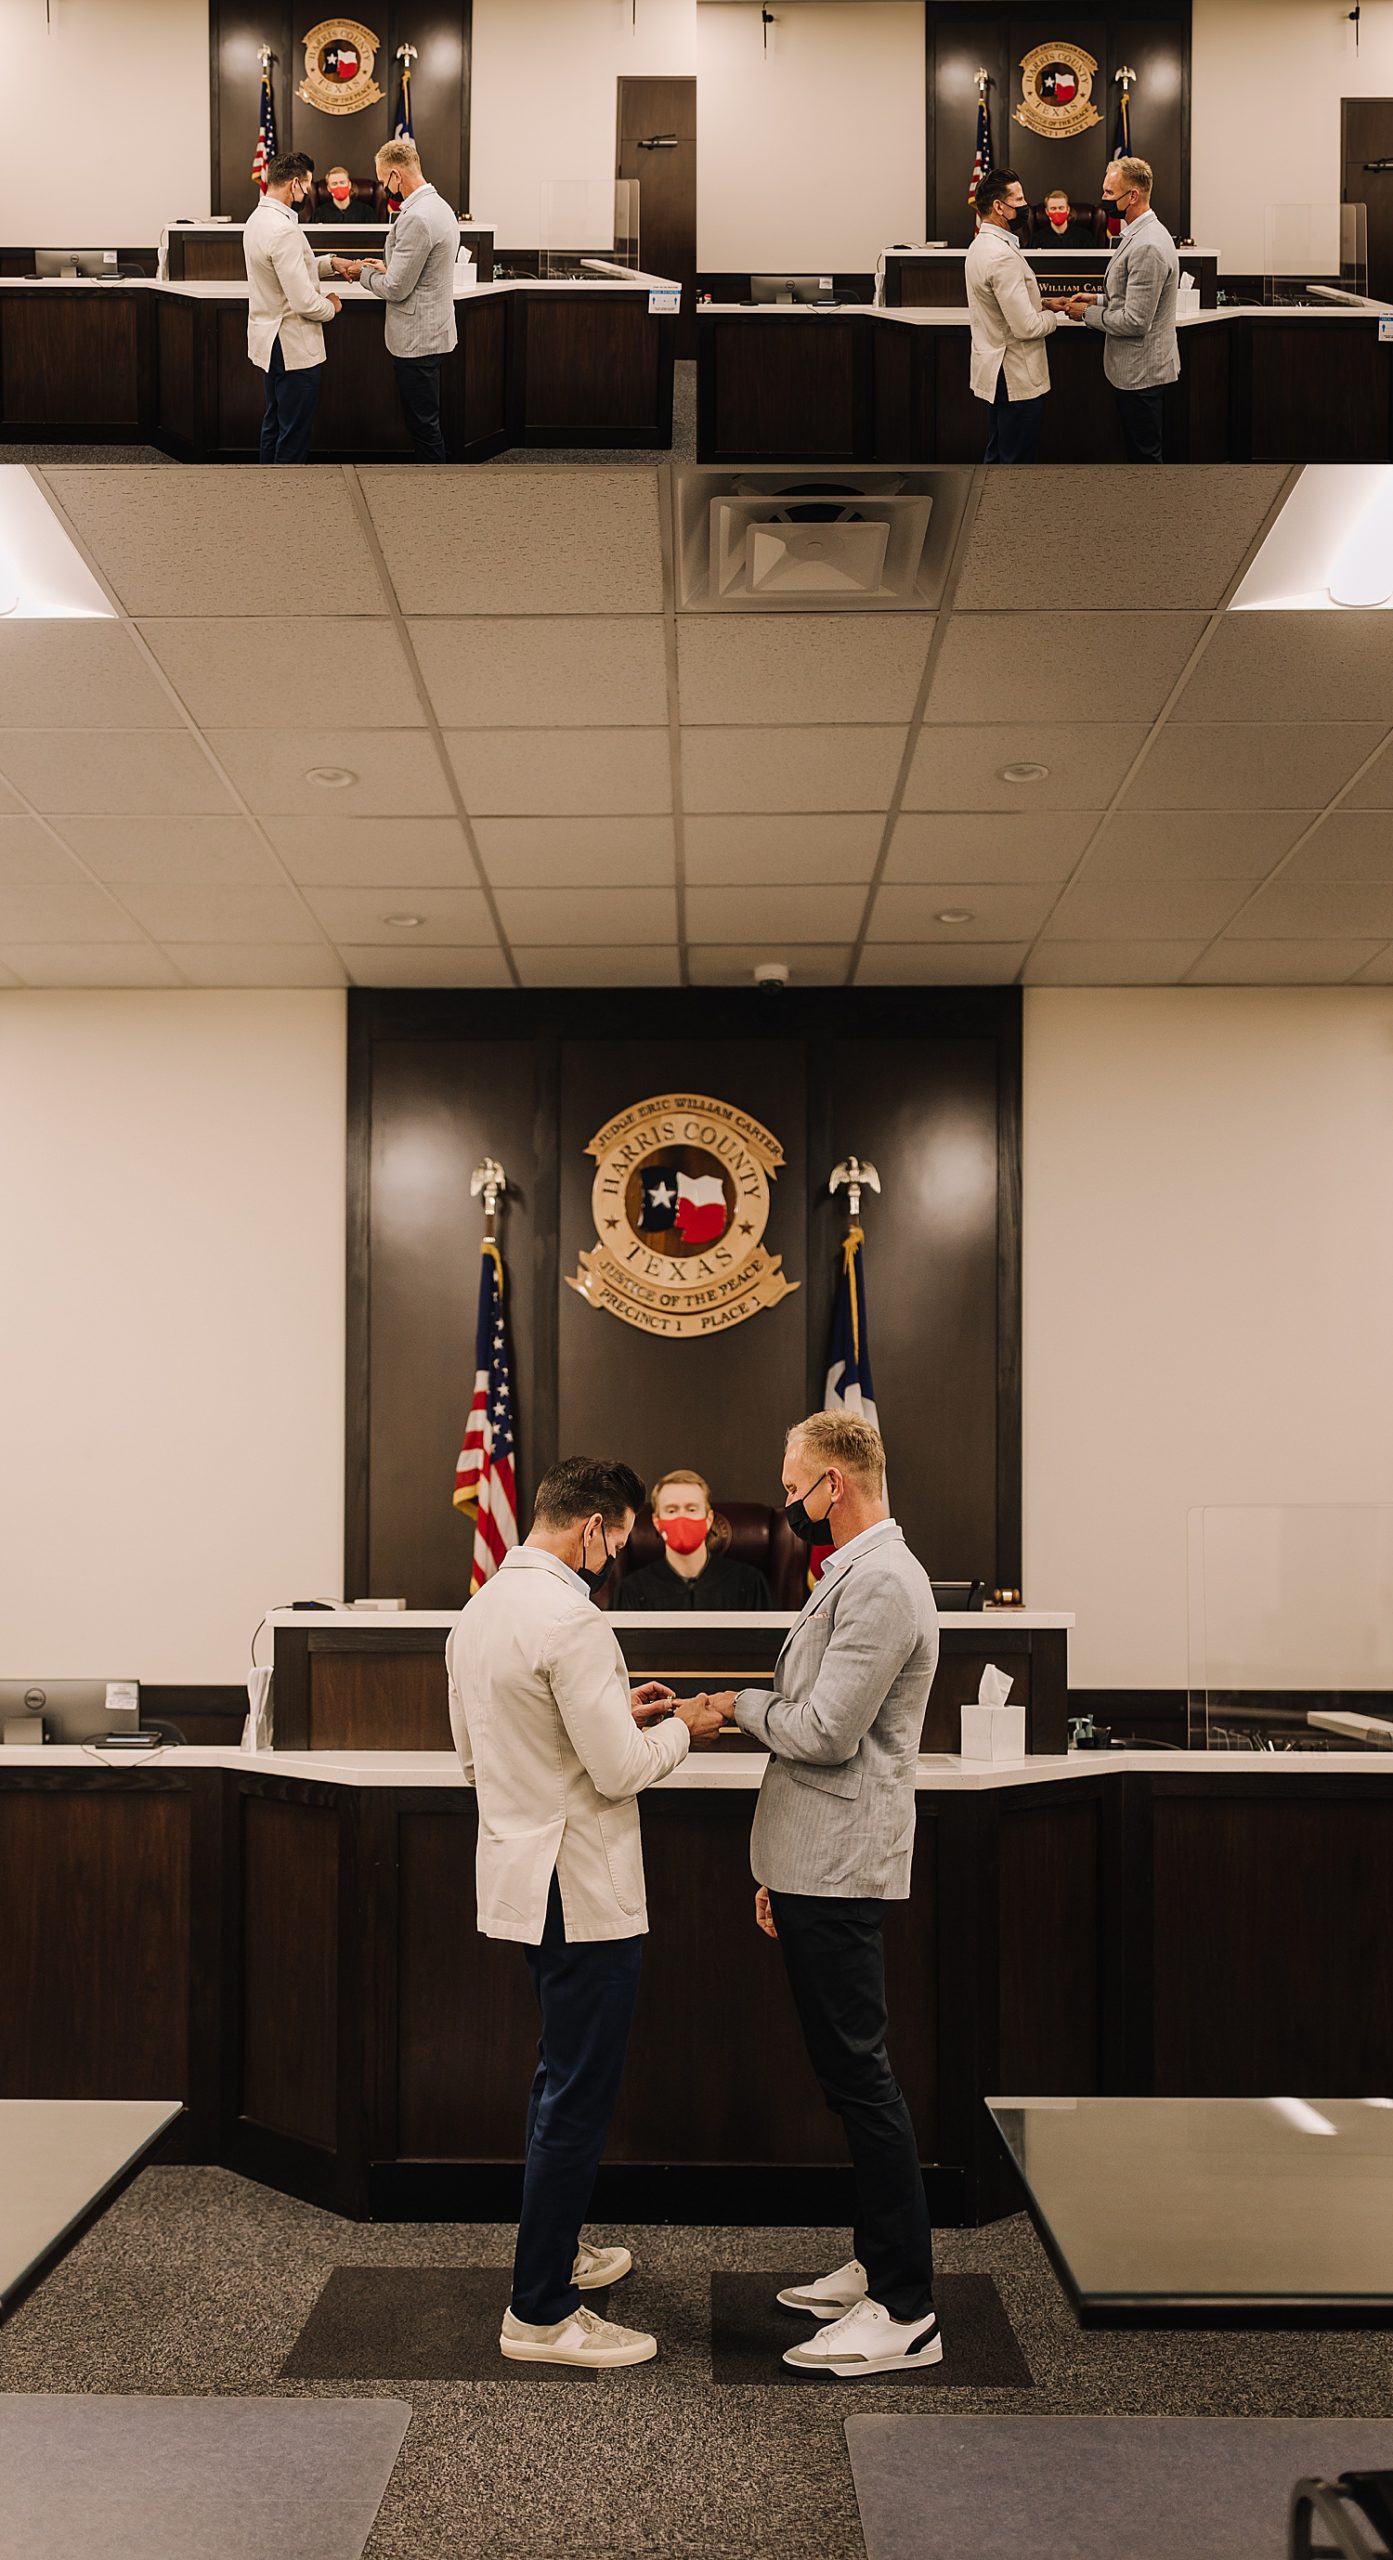 Almost married men exchange rings at intimate courthouse wedding in front of judge 